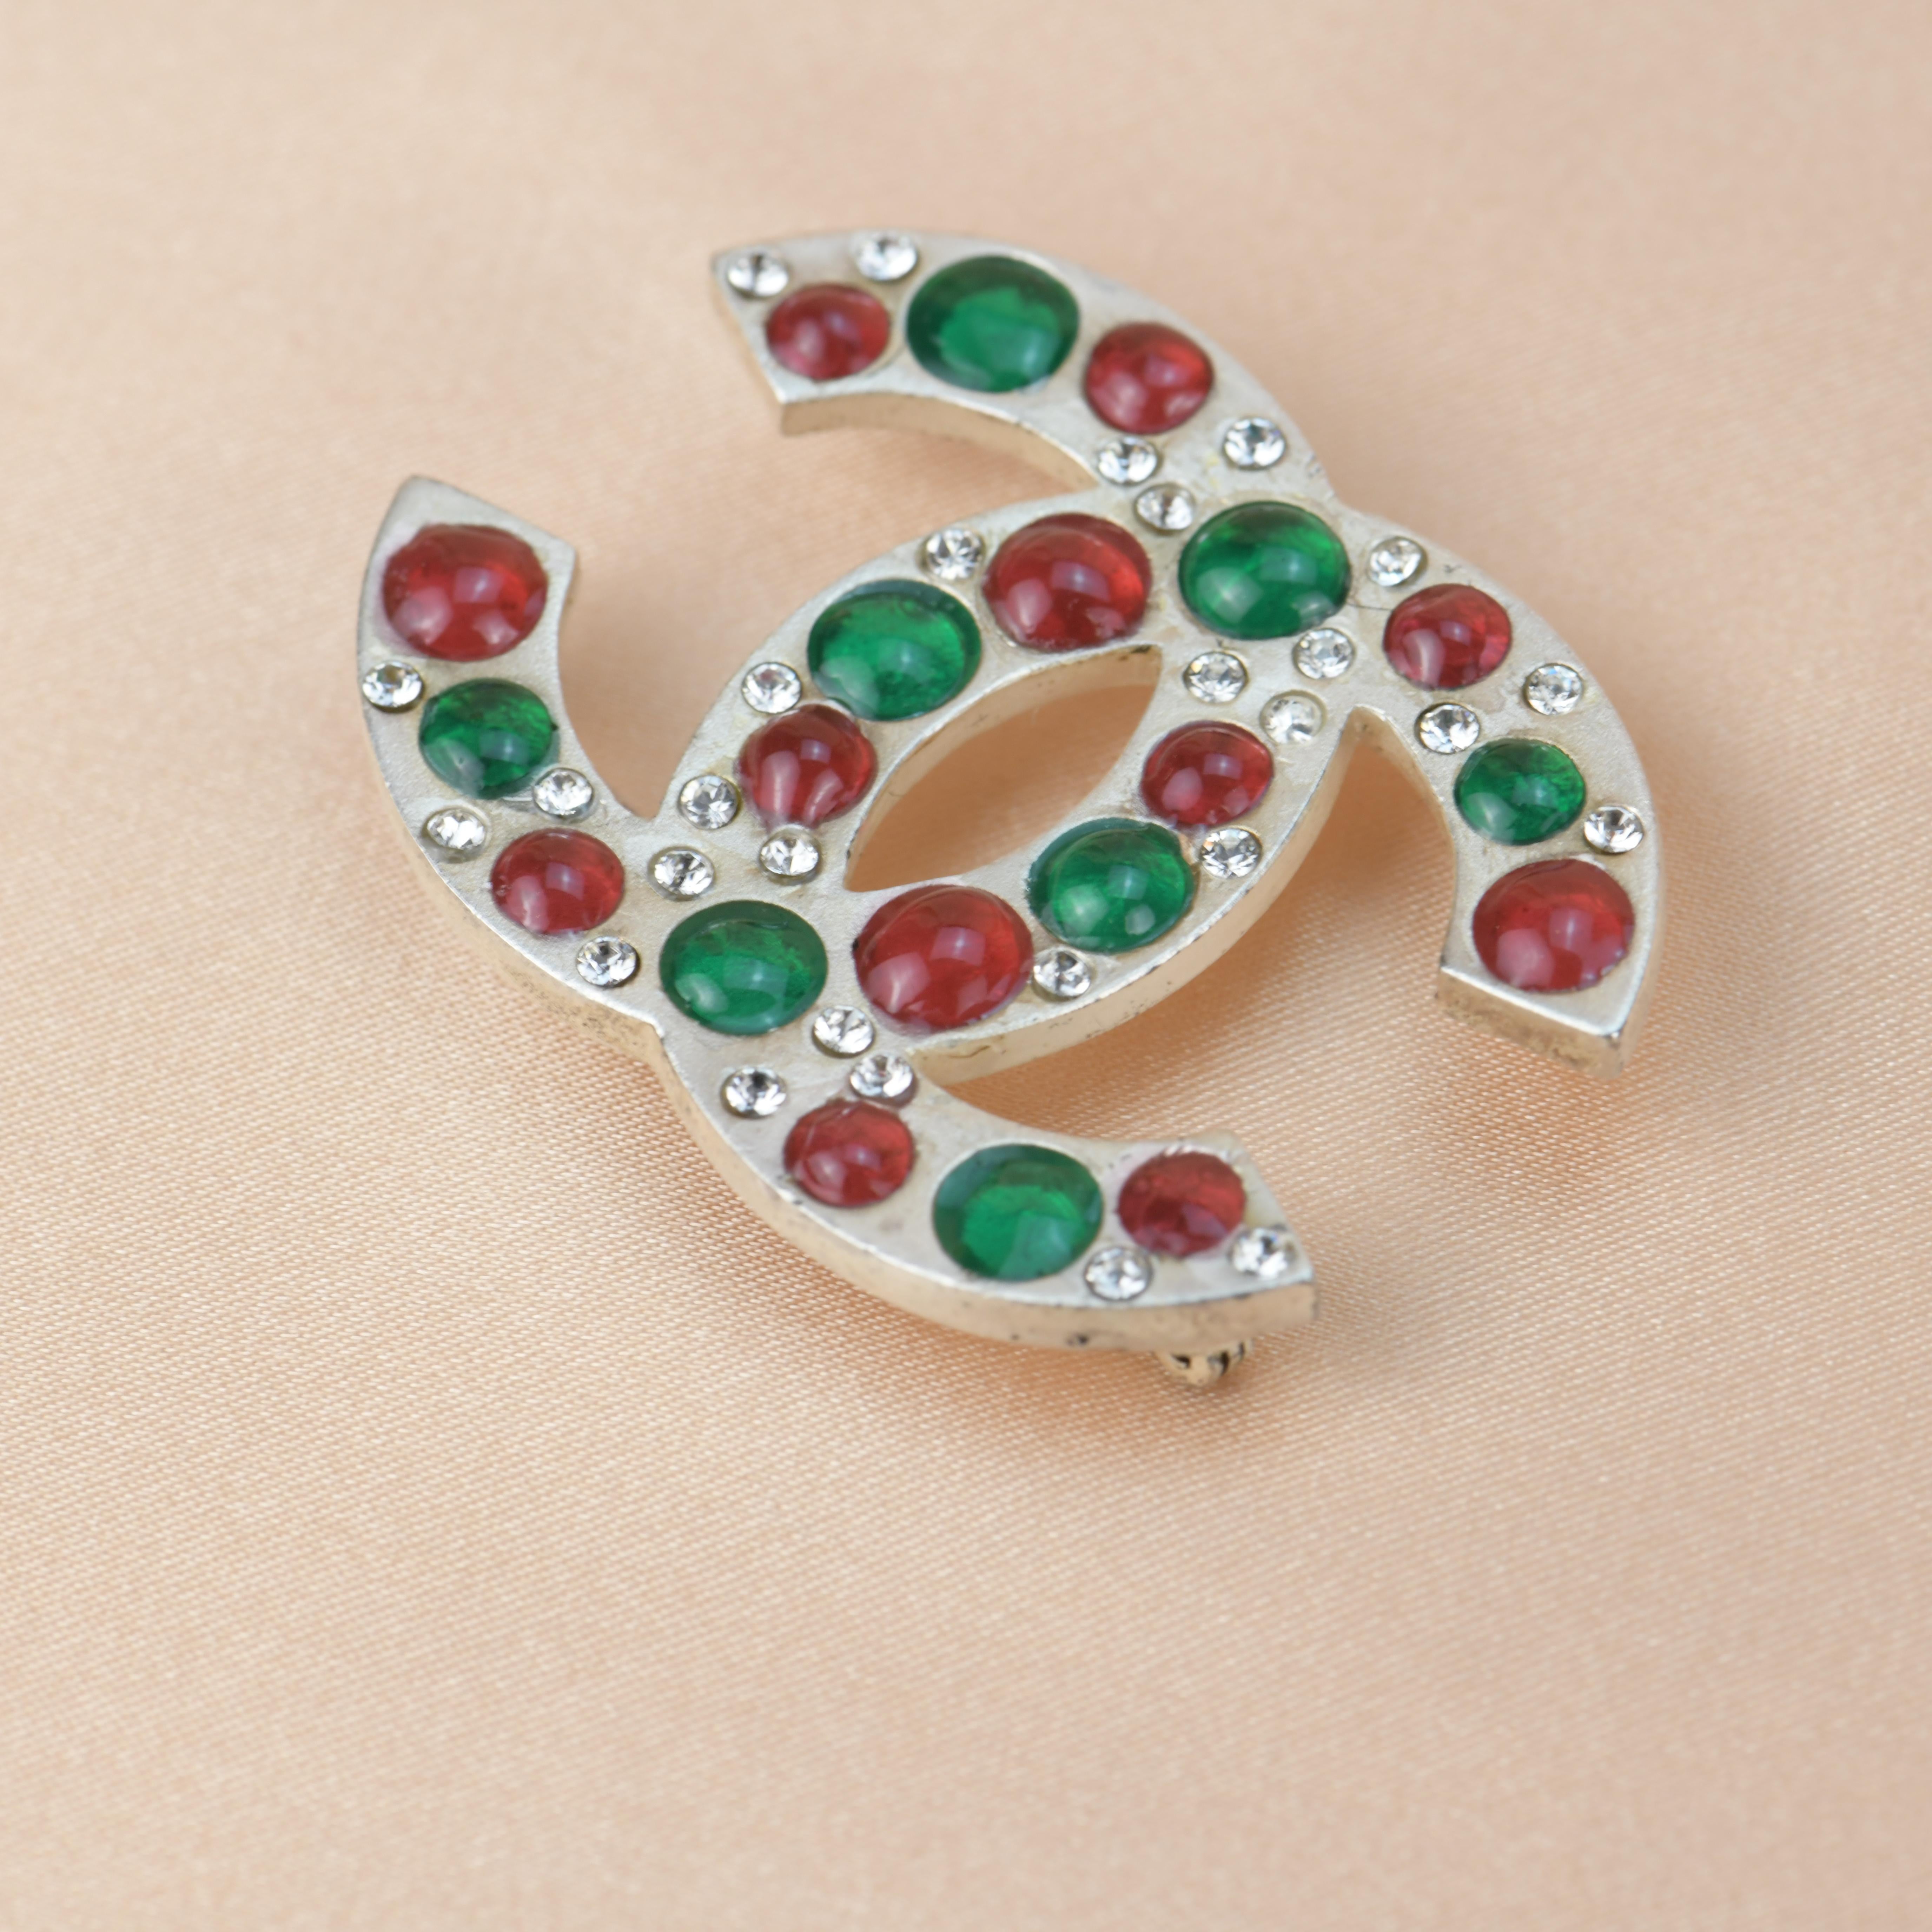 Women's or Men's Chanel Vintage Silver Gilt CC Brooch with Vermilion and Emerald Green Gripoix